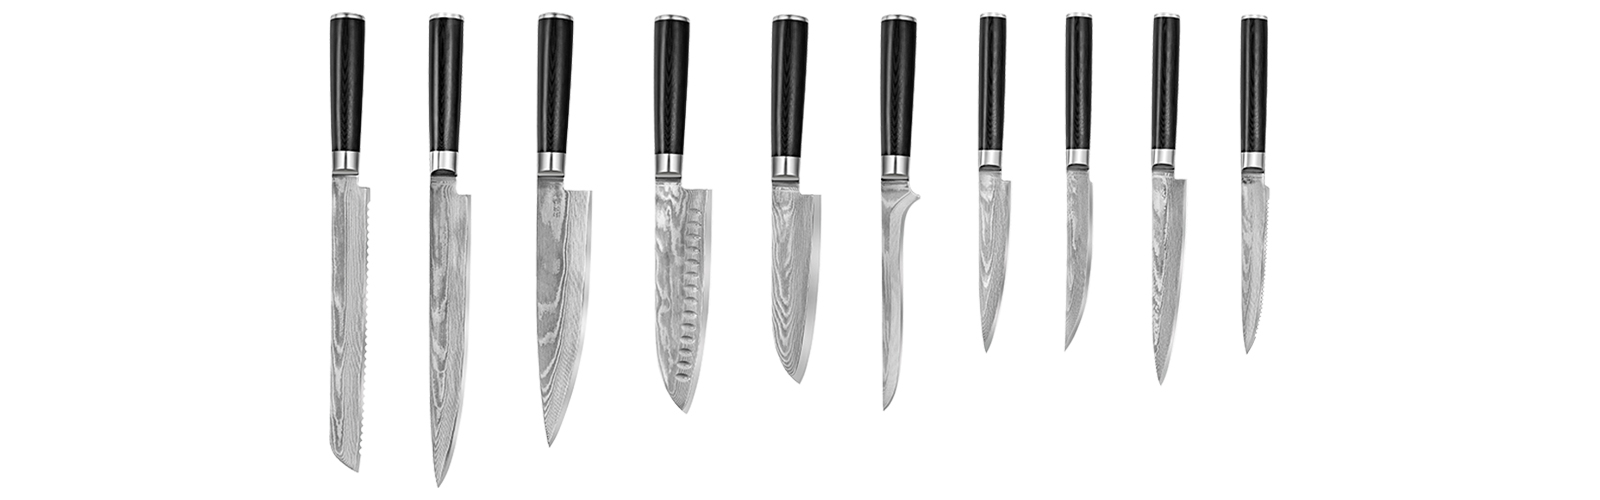 https://www.rewardhospitality.co.nz/Images/ContentImages/Top%20Ten%20Knives.jpg